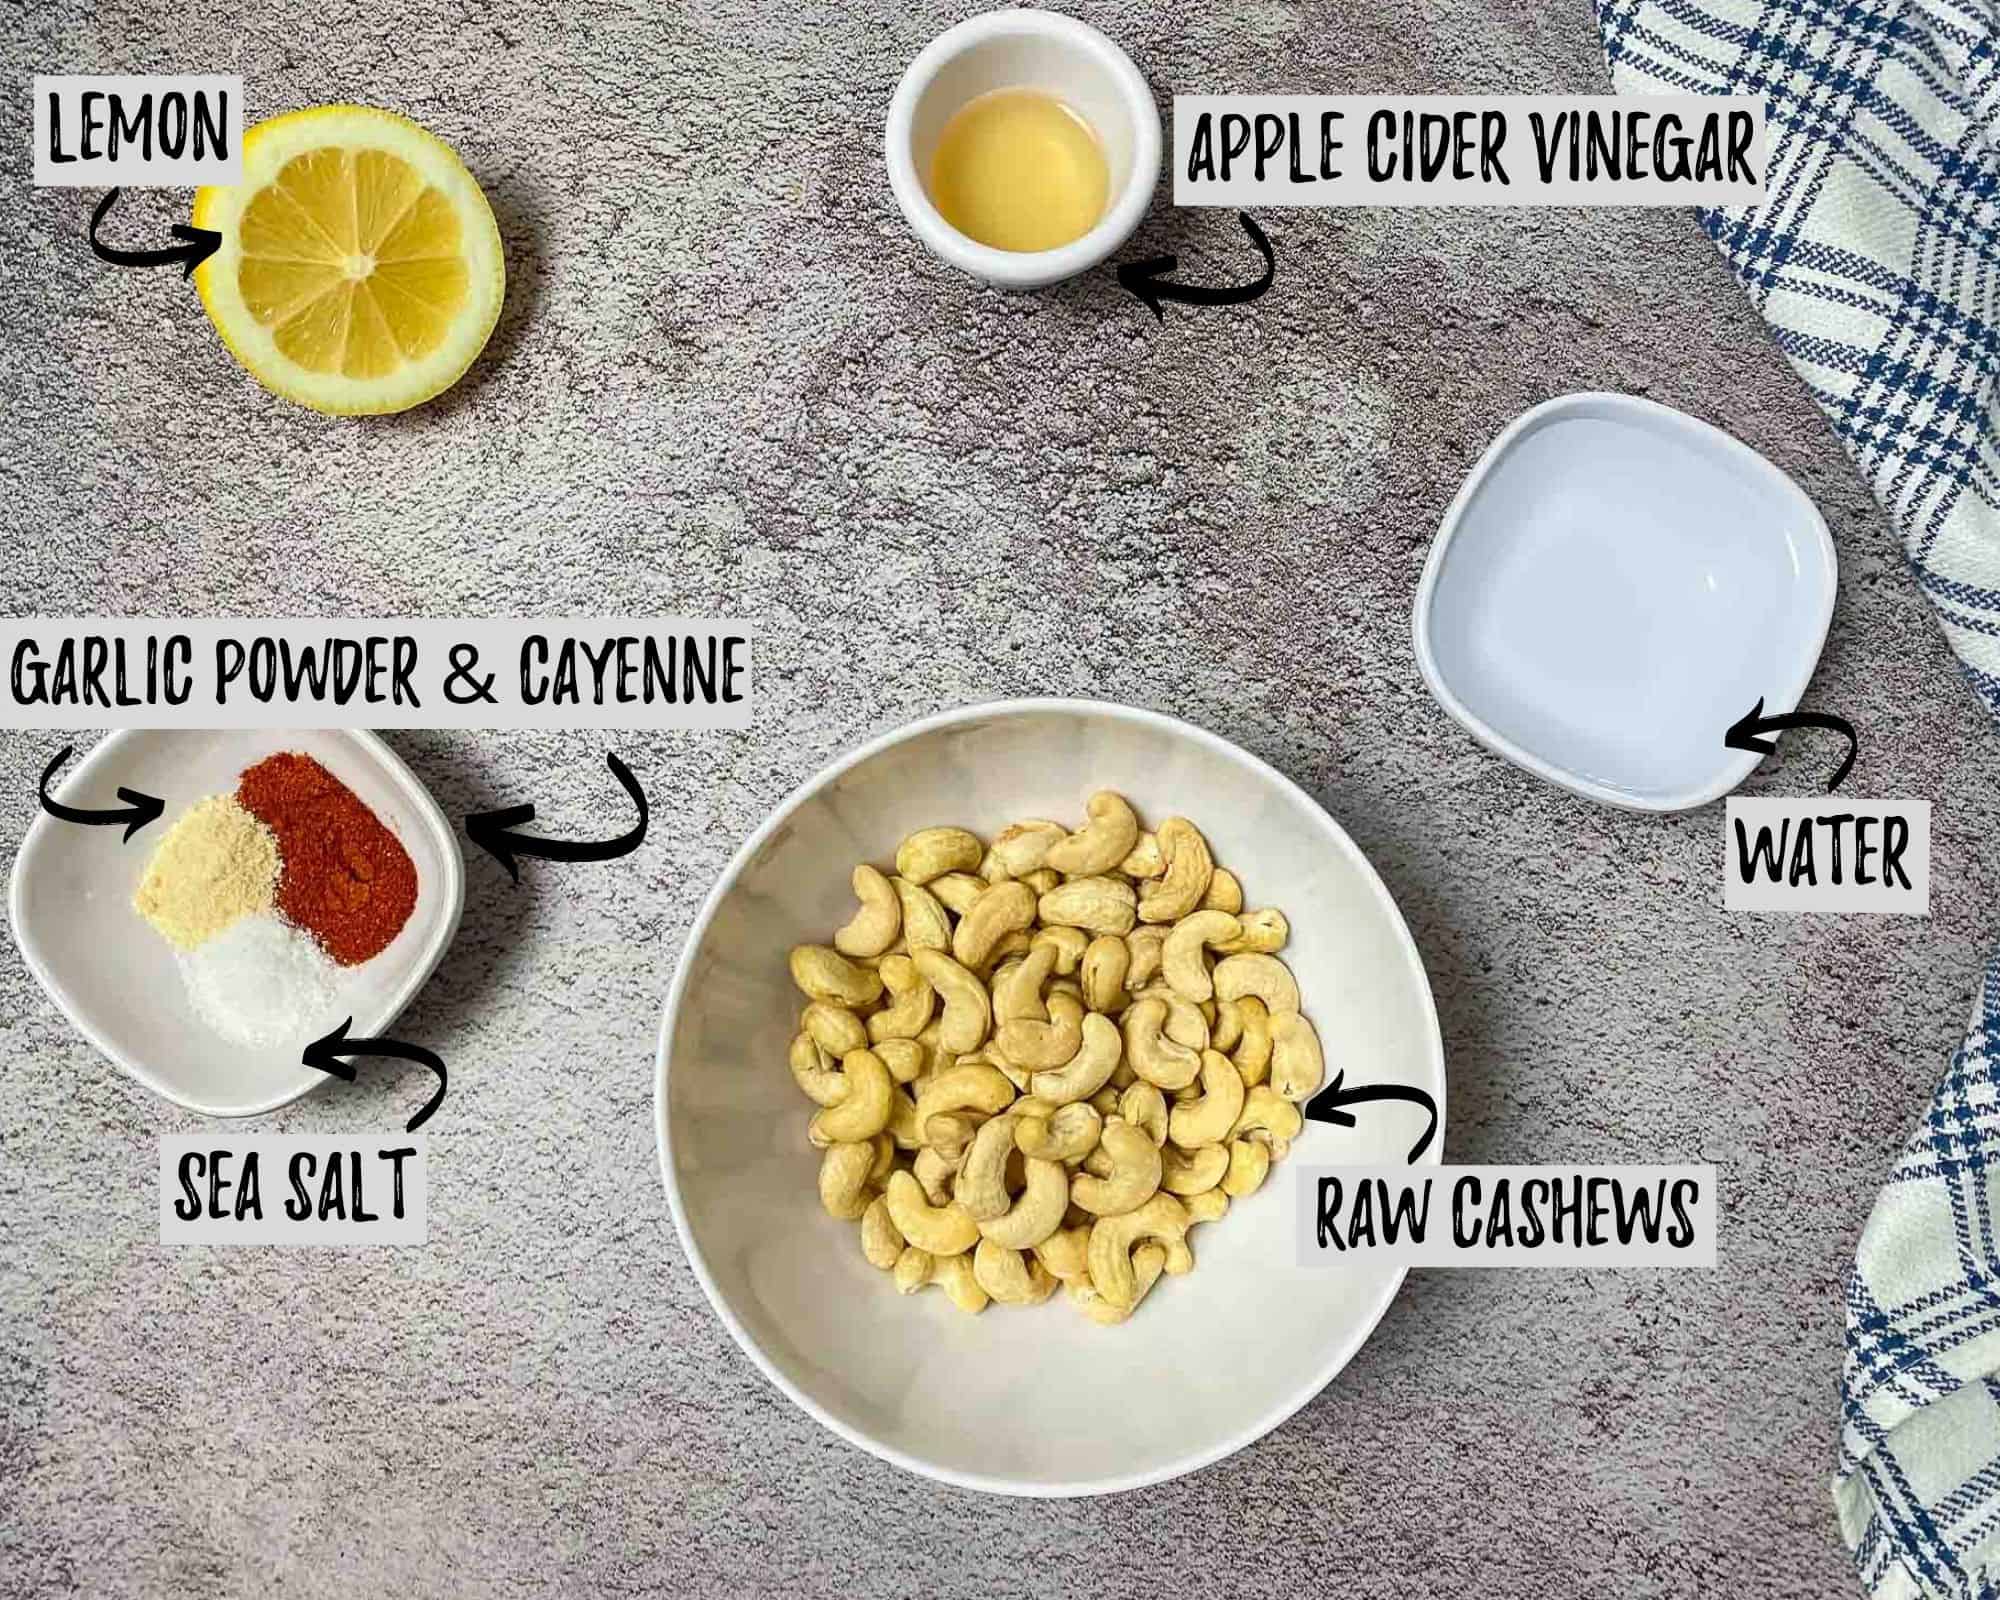 bowl of raw cashews, cup of apple cider vinegar, bowl of water, half a lemon and a bowl of seasoning